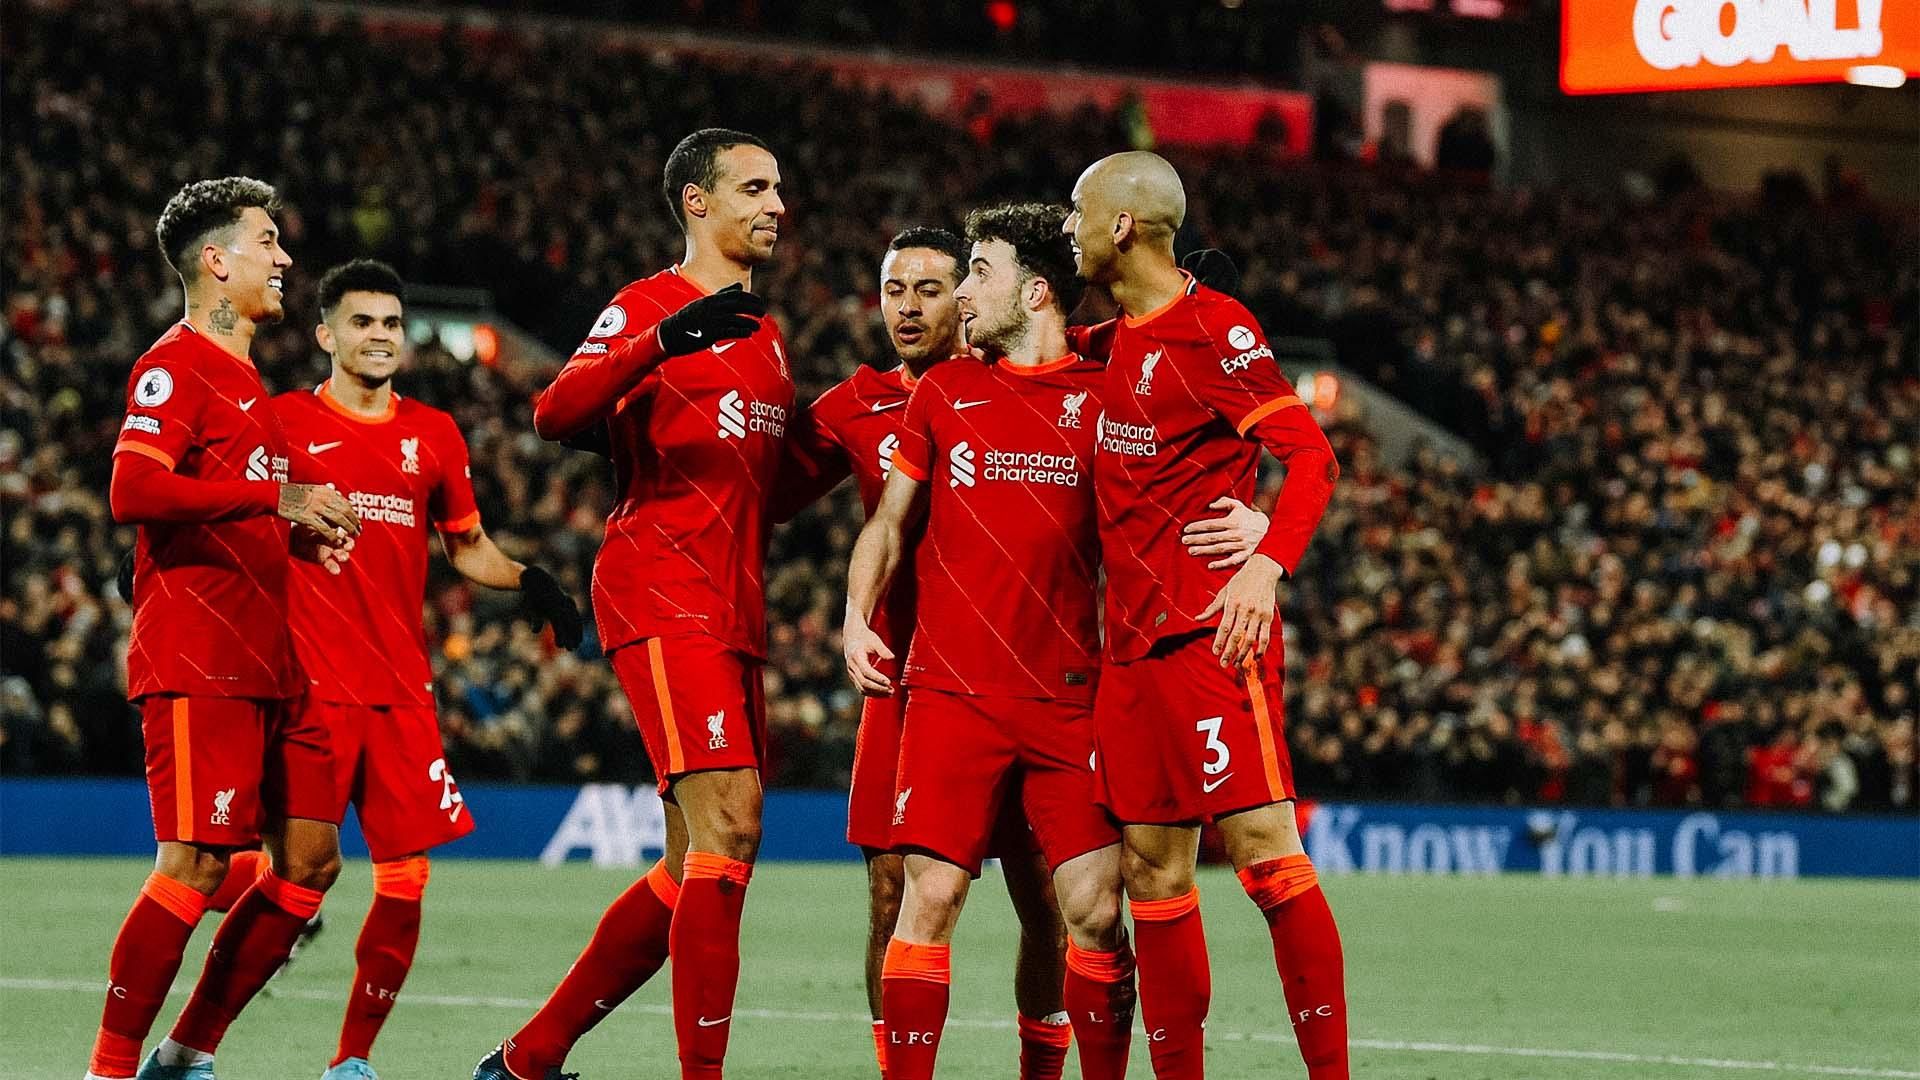 Inter - Liverpool Bets, Odds and Lineups for the UEFA Champions League Round of 16 | February 16